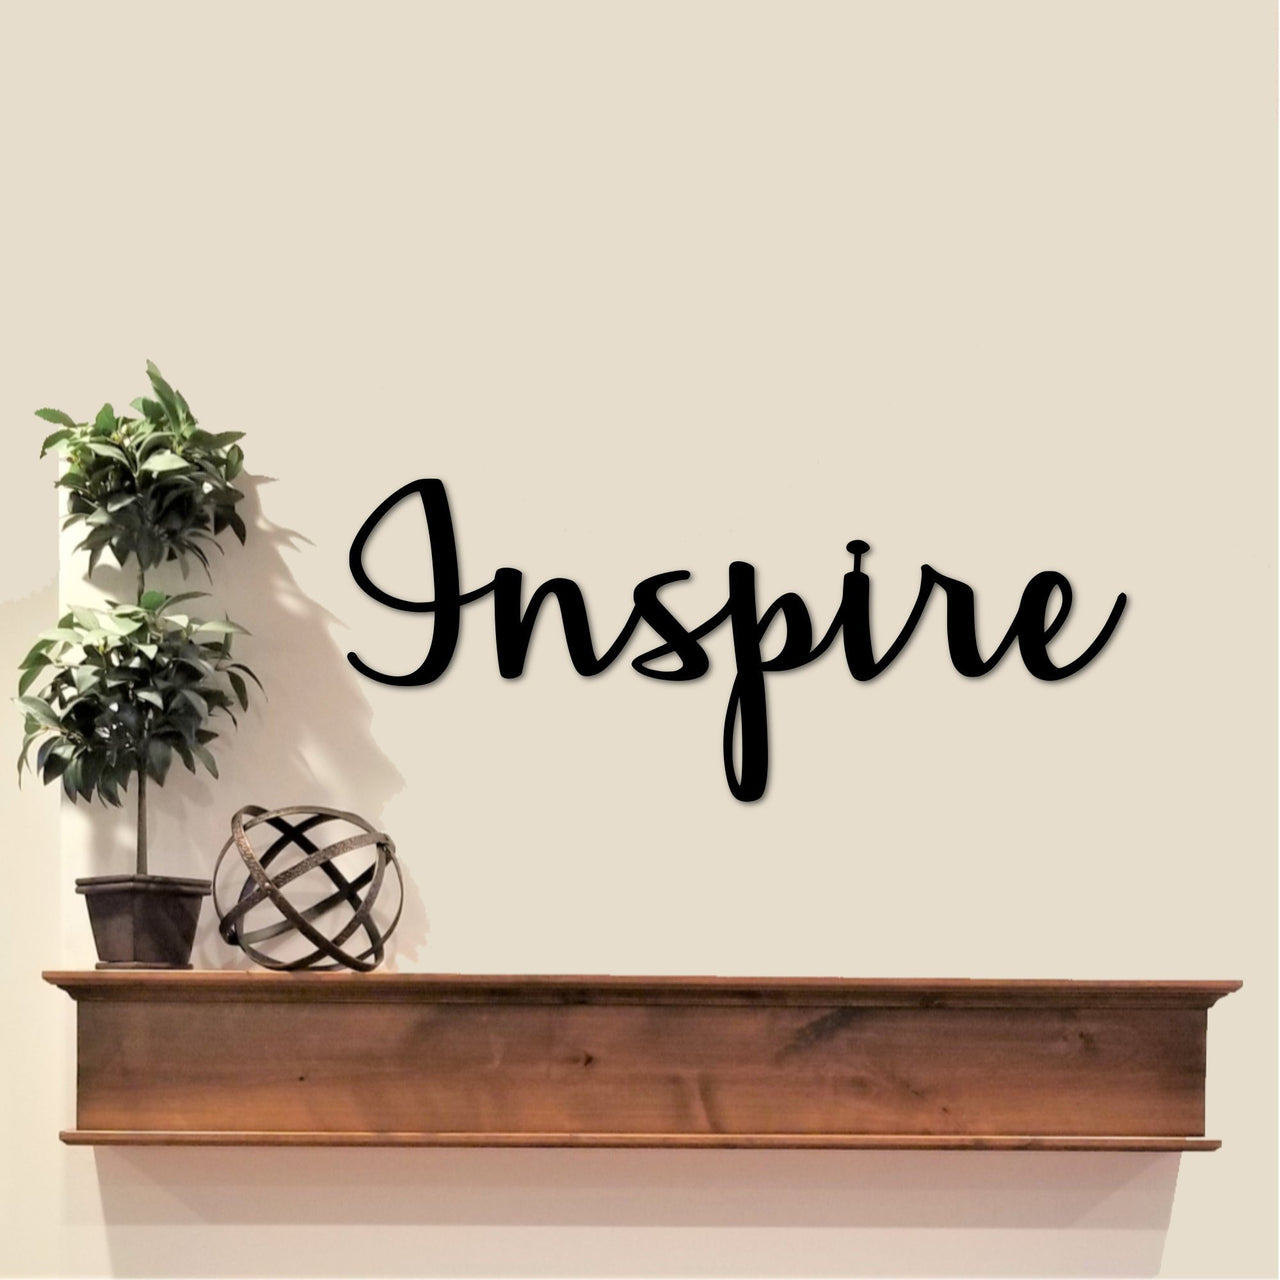 Inspire Sign | Metal Wall Decor | Wall Art | Inspire Gifts | Inspirational Wall Quote | Inspire Handmade Sign | Inspire Me Decor for Wall